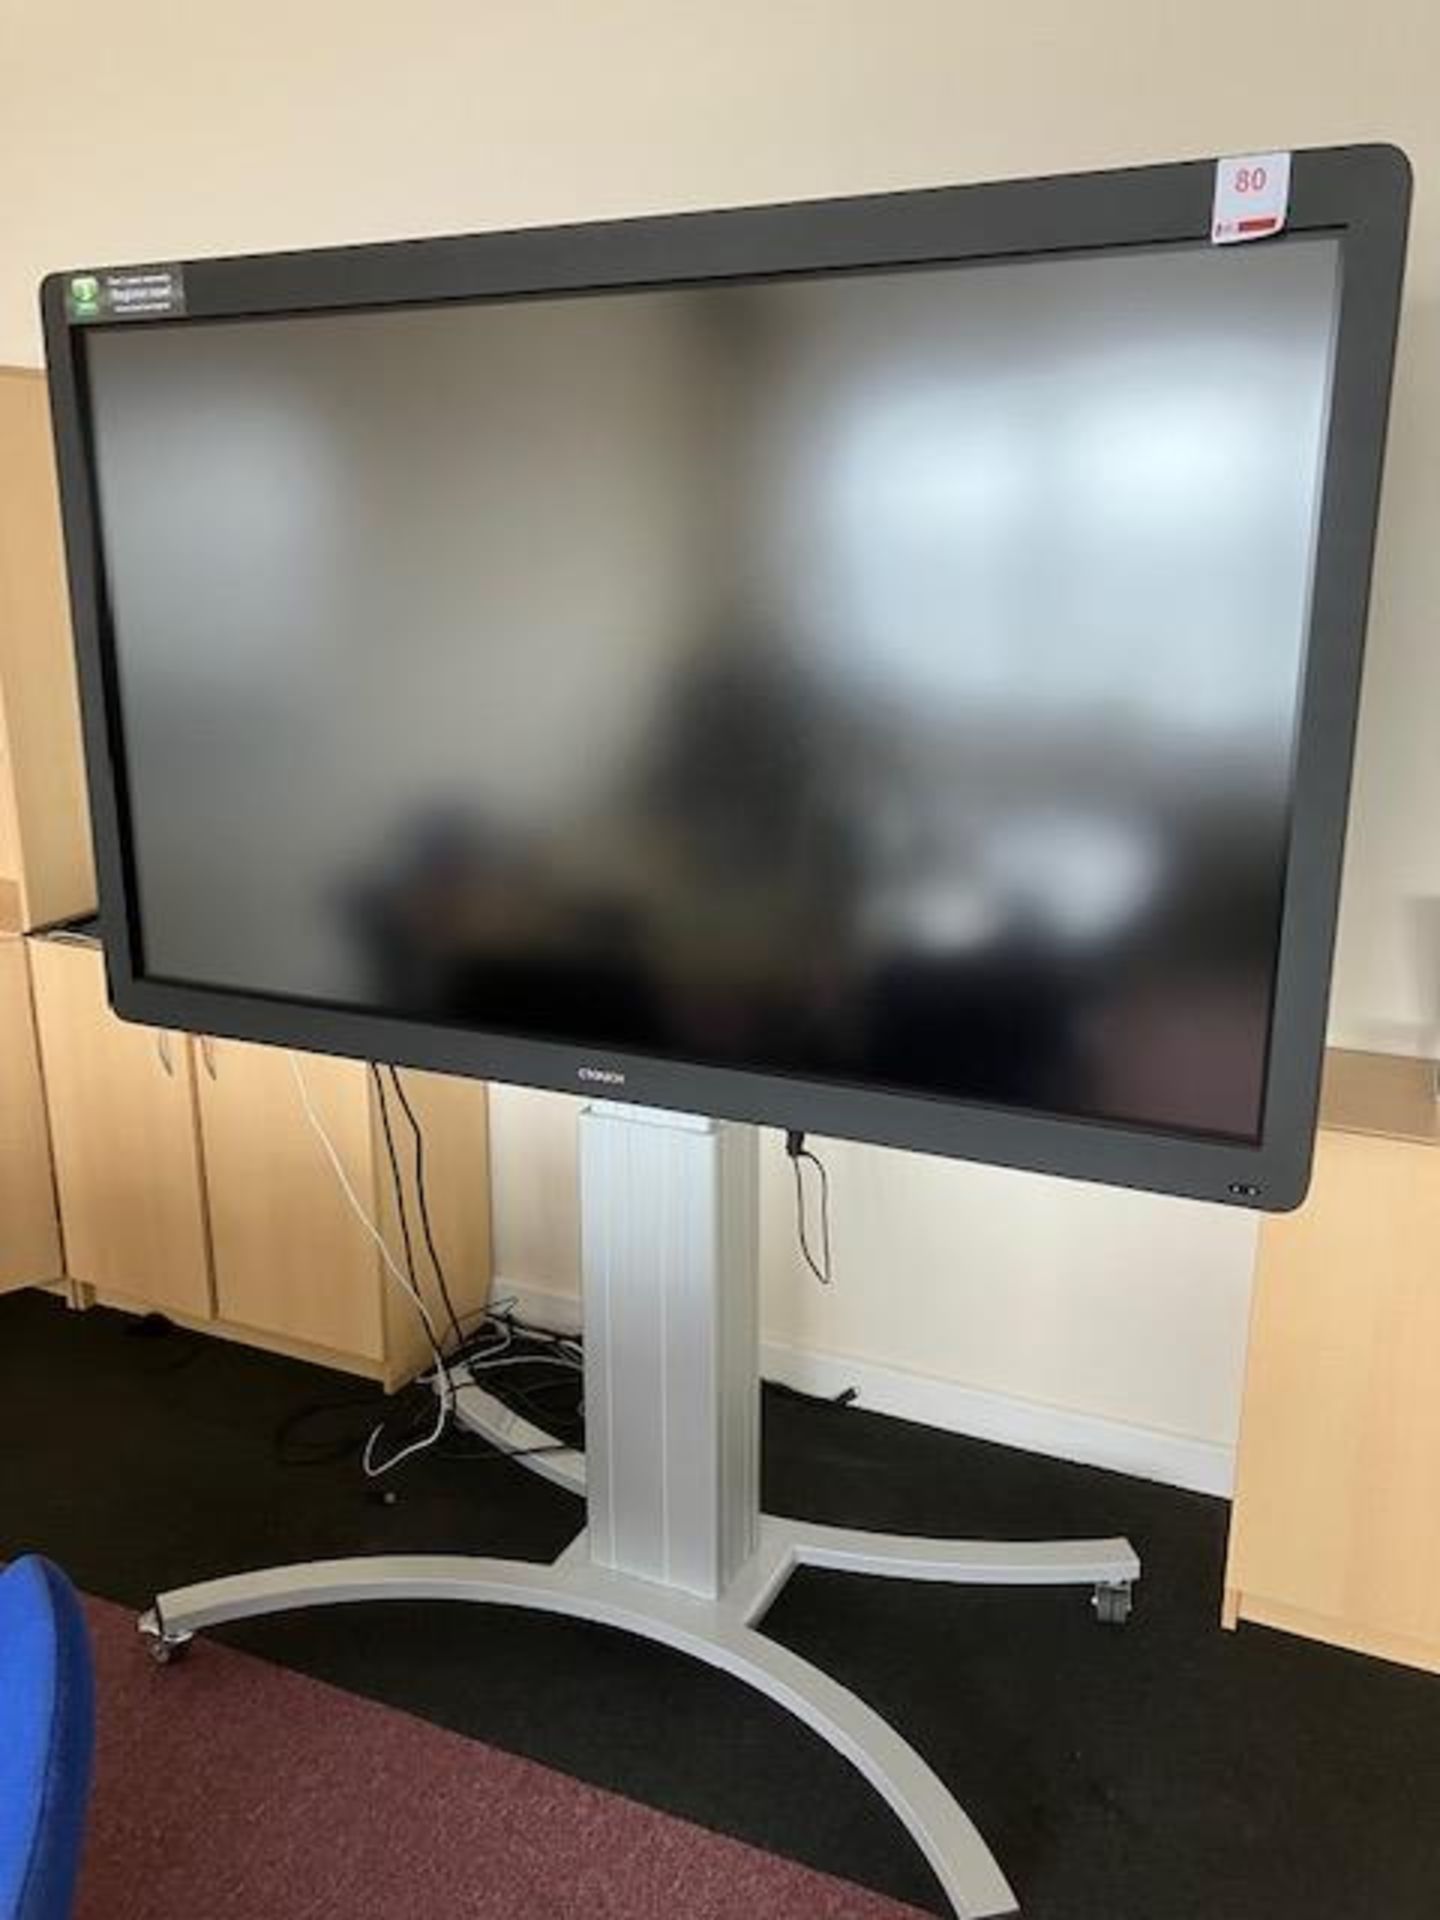 C Touch LED display, model no. CT70LED60D10P, serial no. 5075145155203, version SO7014015208-003N, m